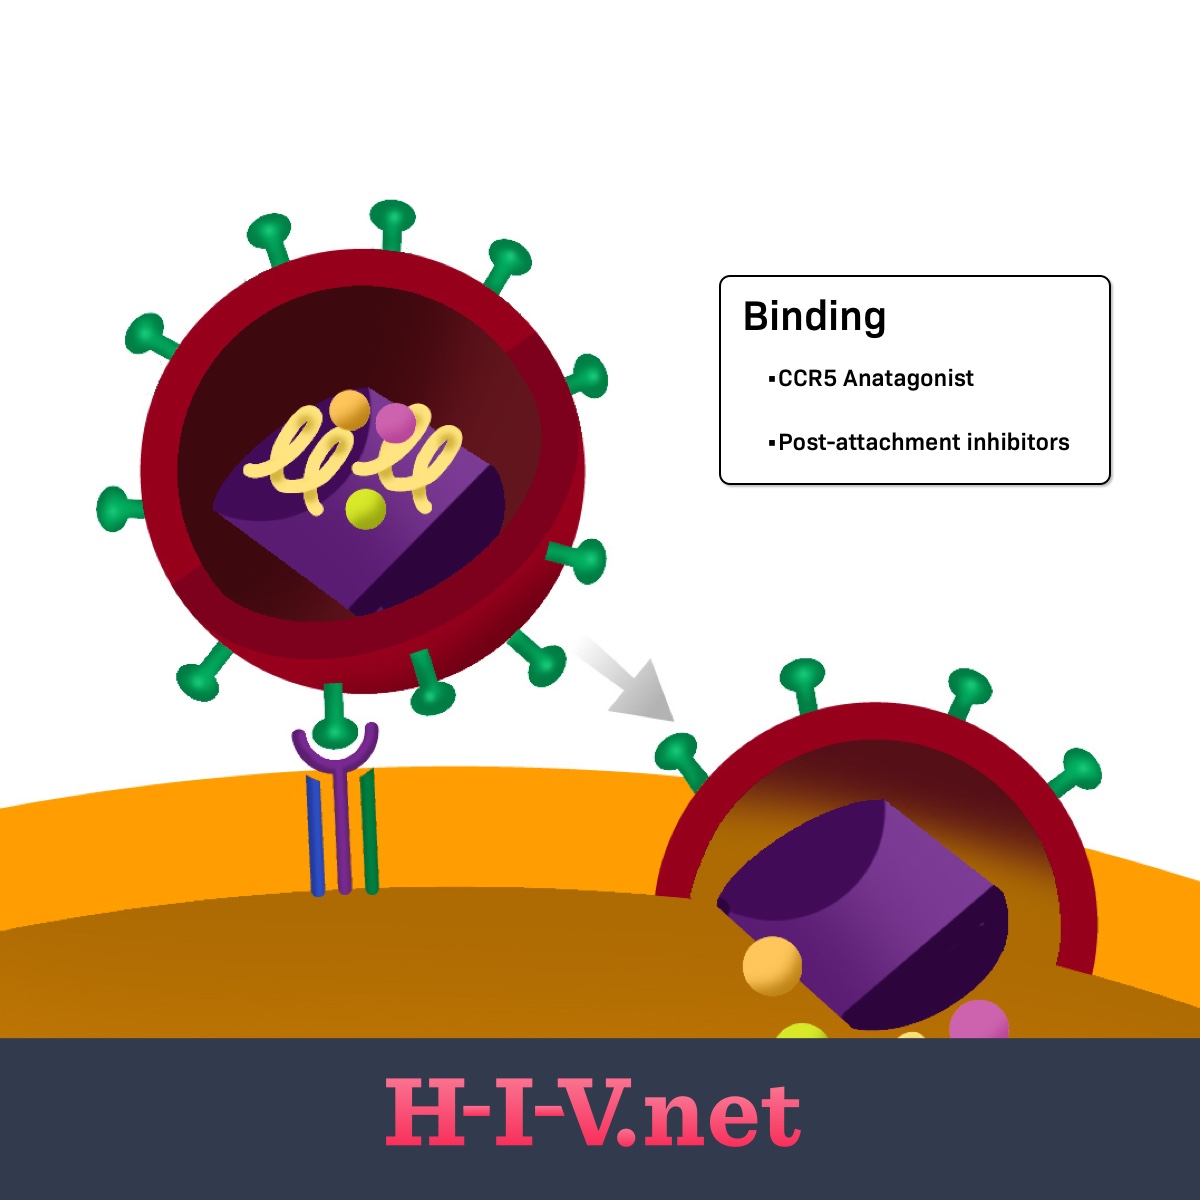 Post-attachment inhibitors target binding in the HIV life cycle